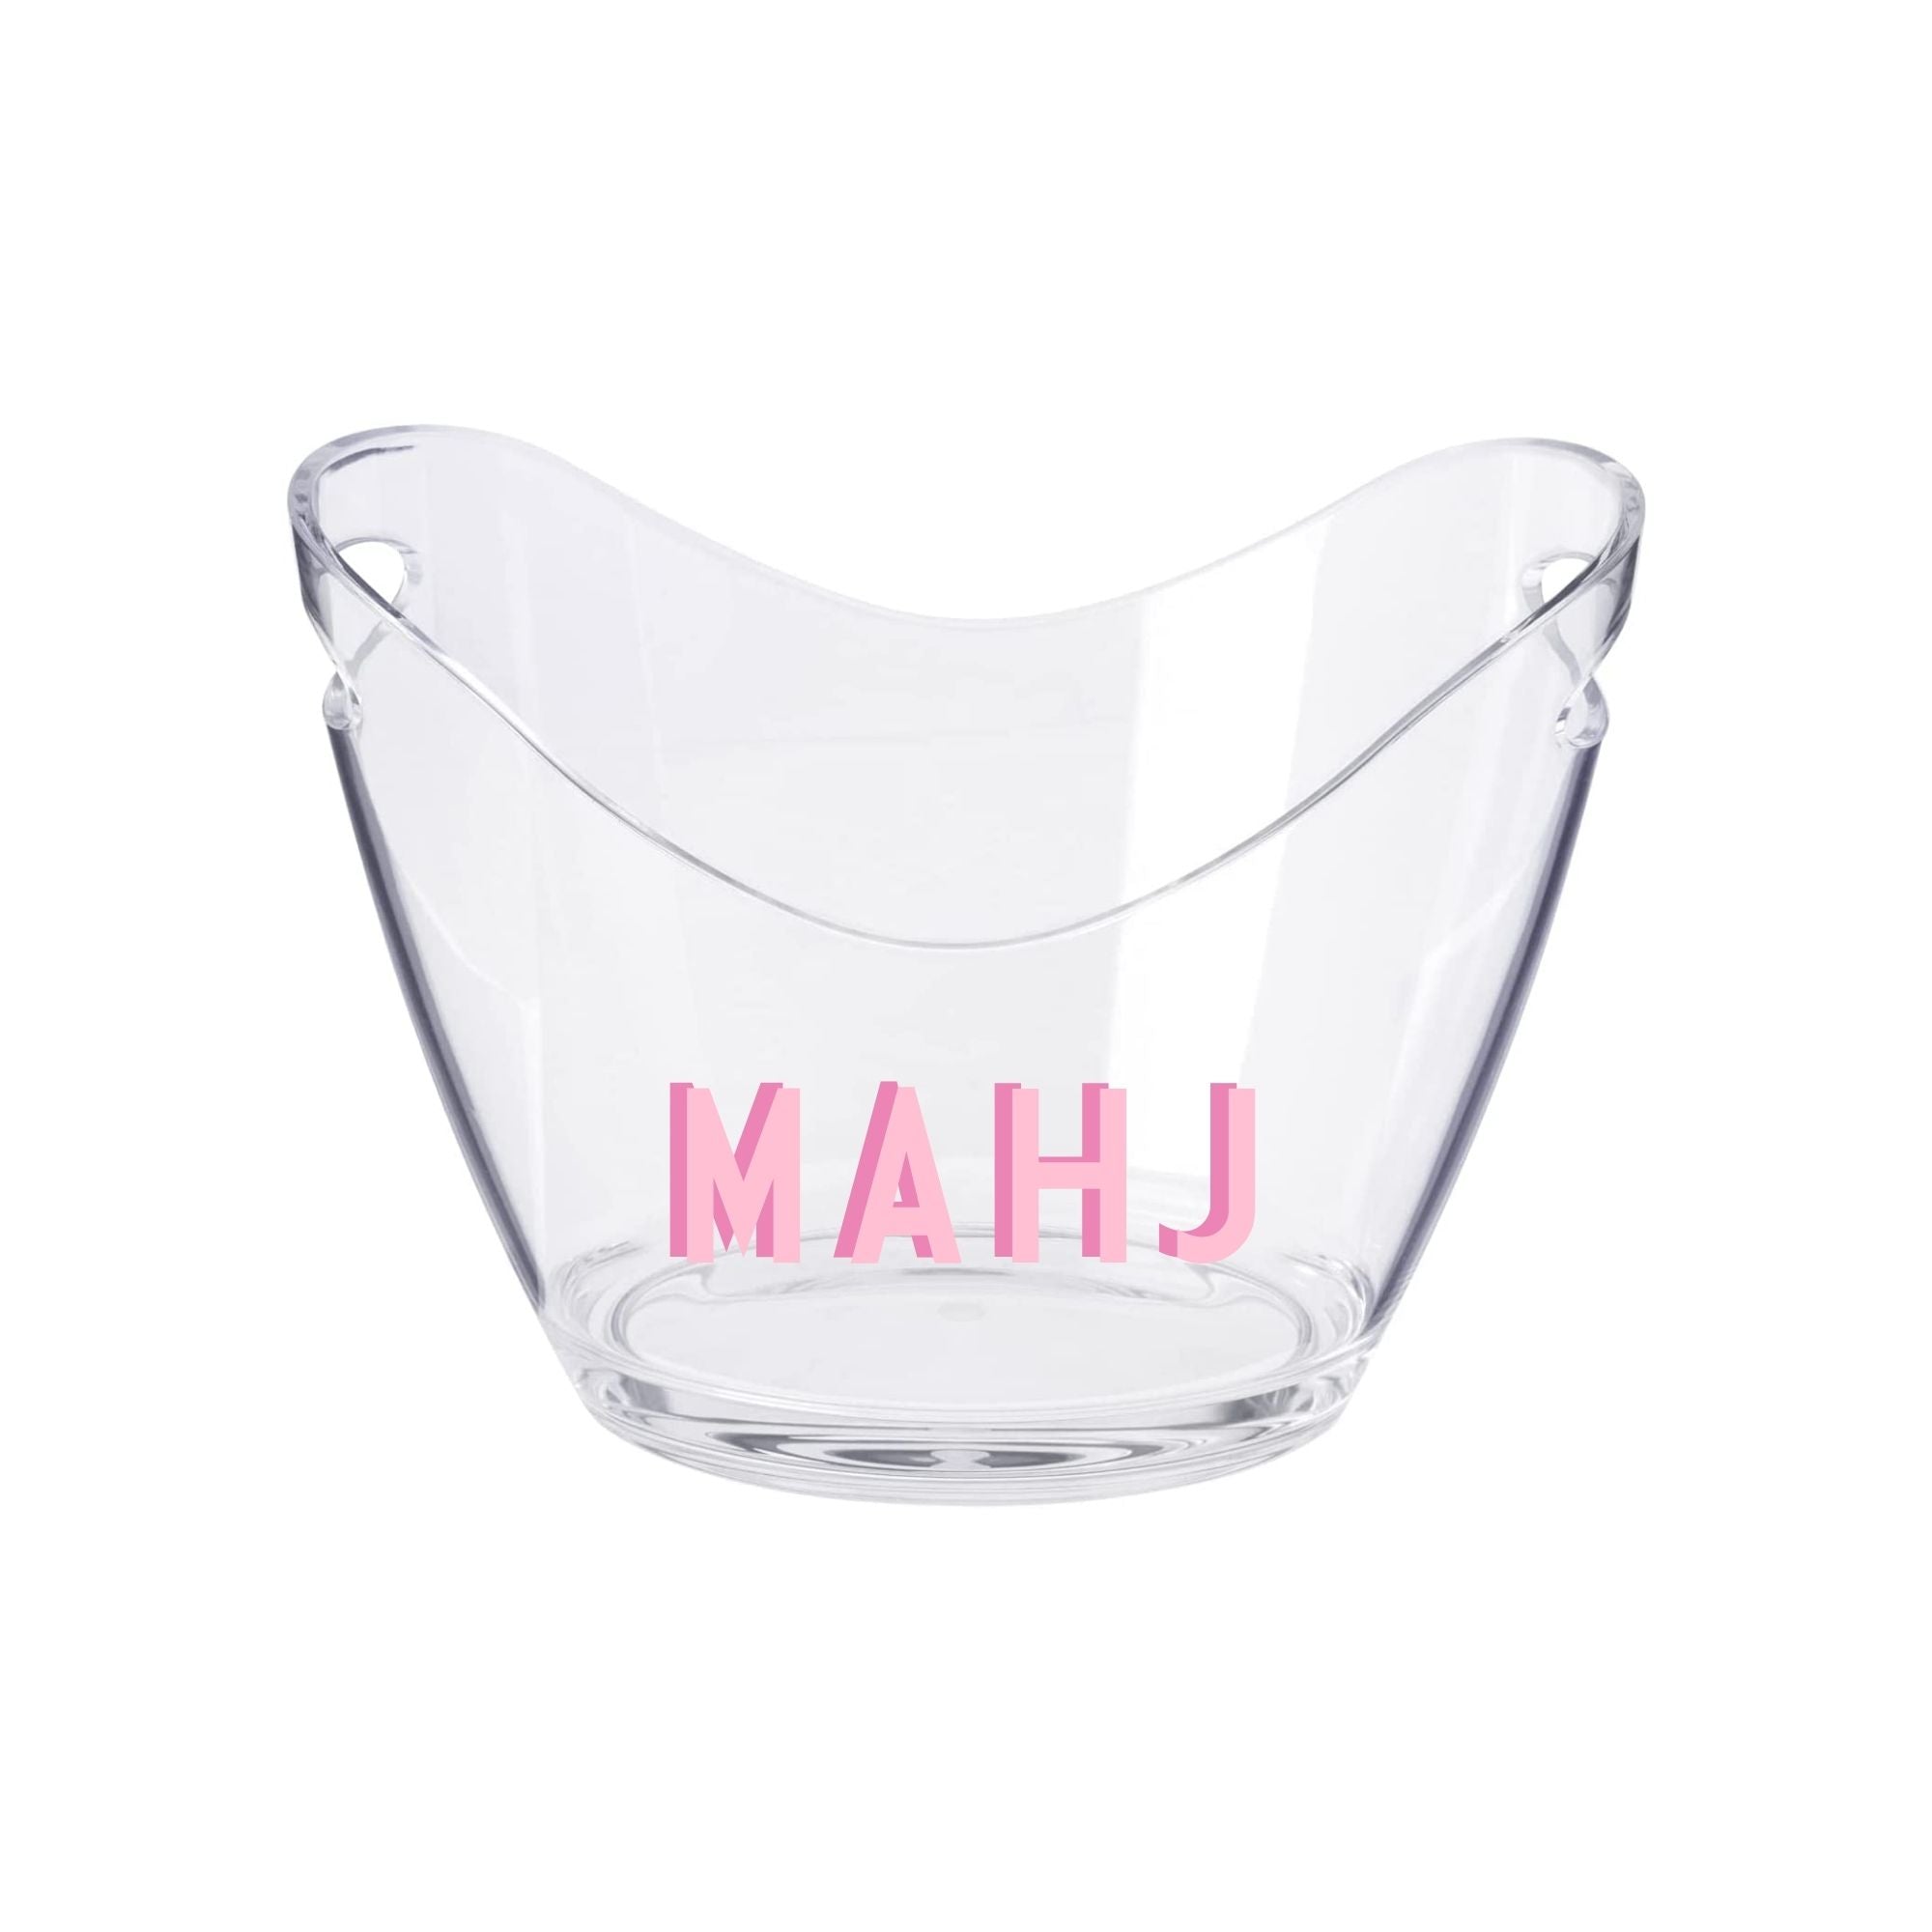 A wide ice bucket that reads "mahj" in pink letters